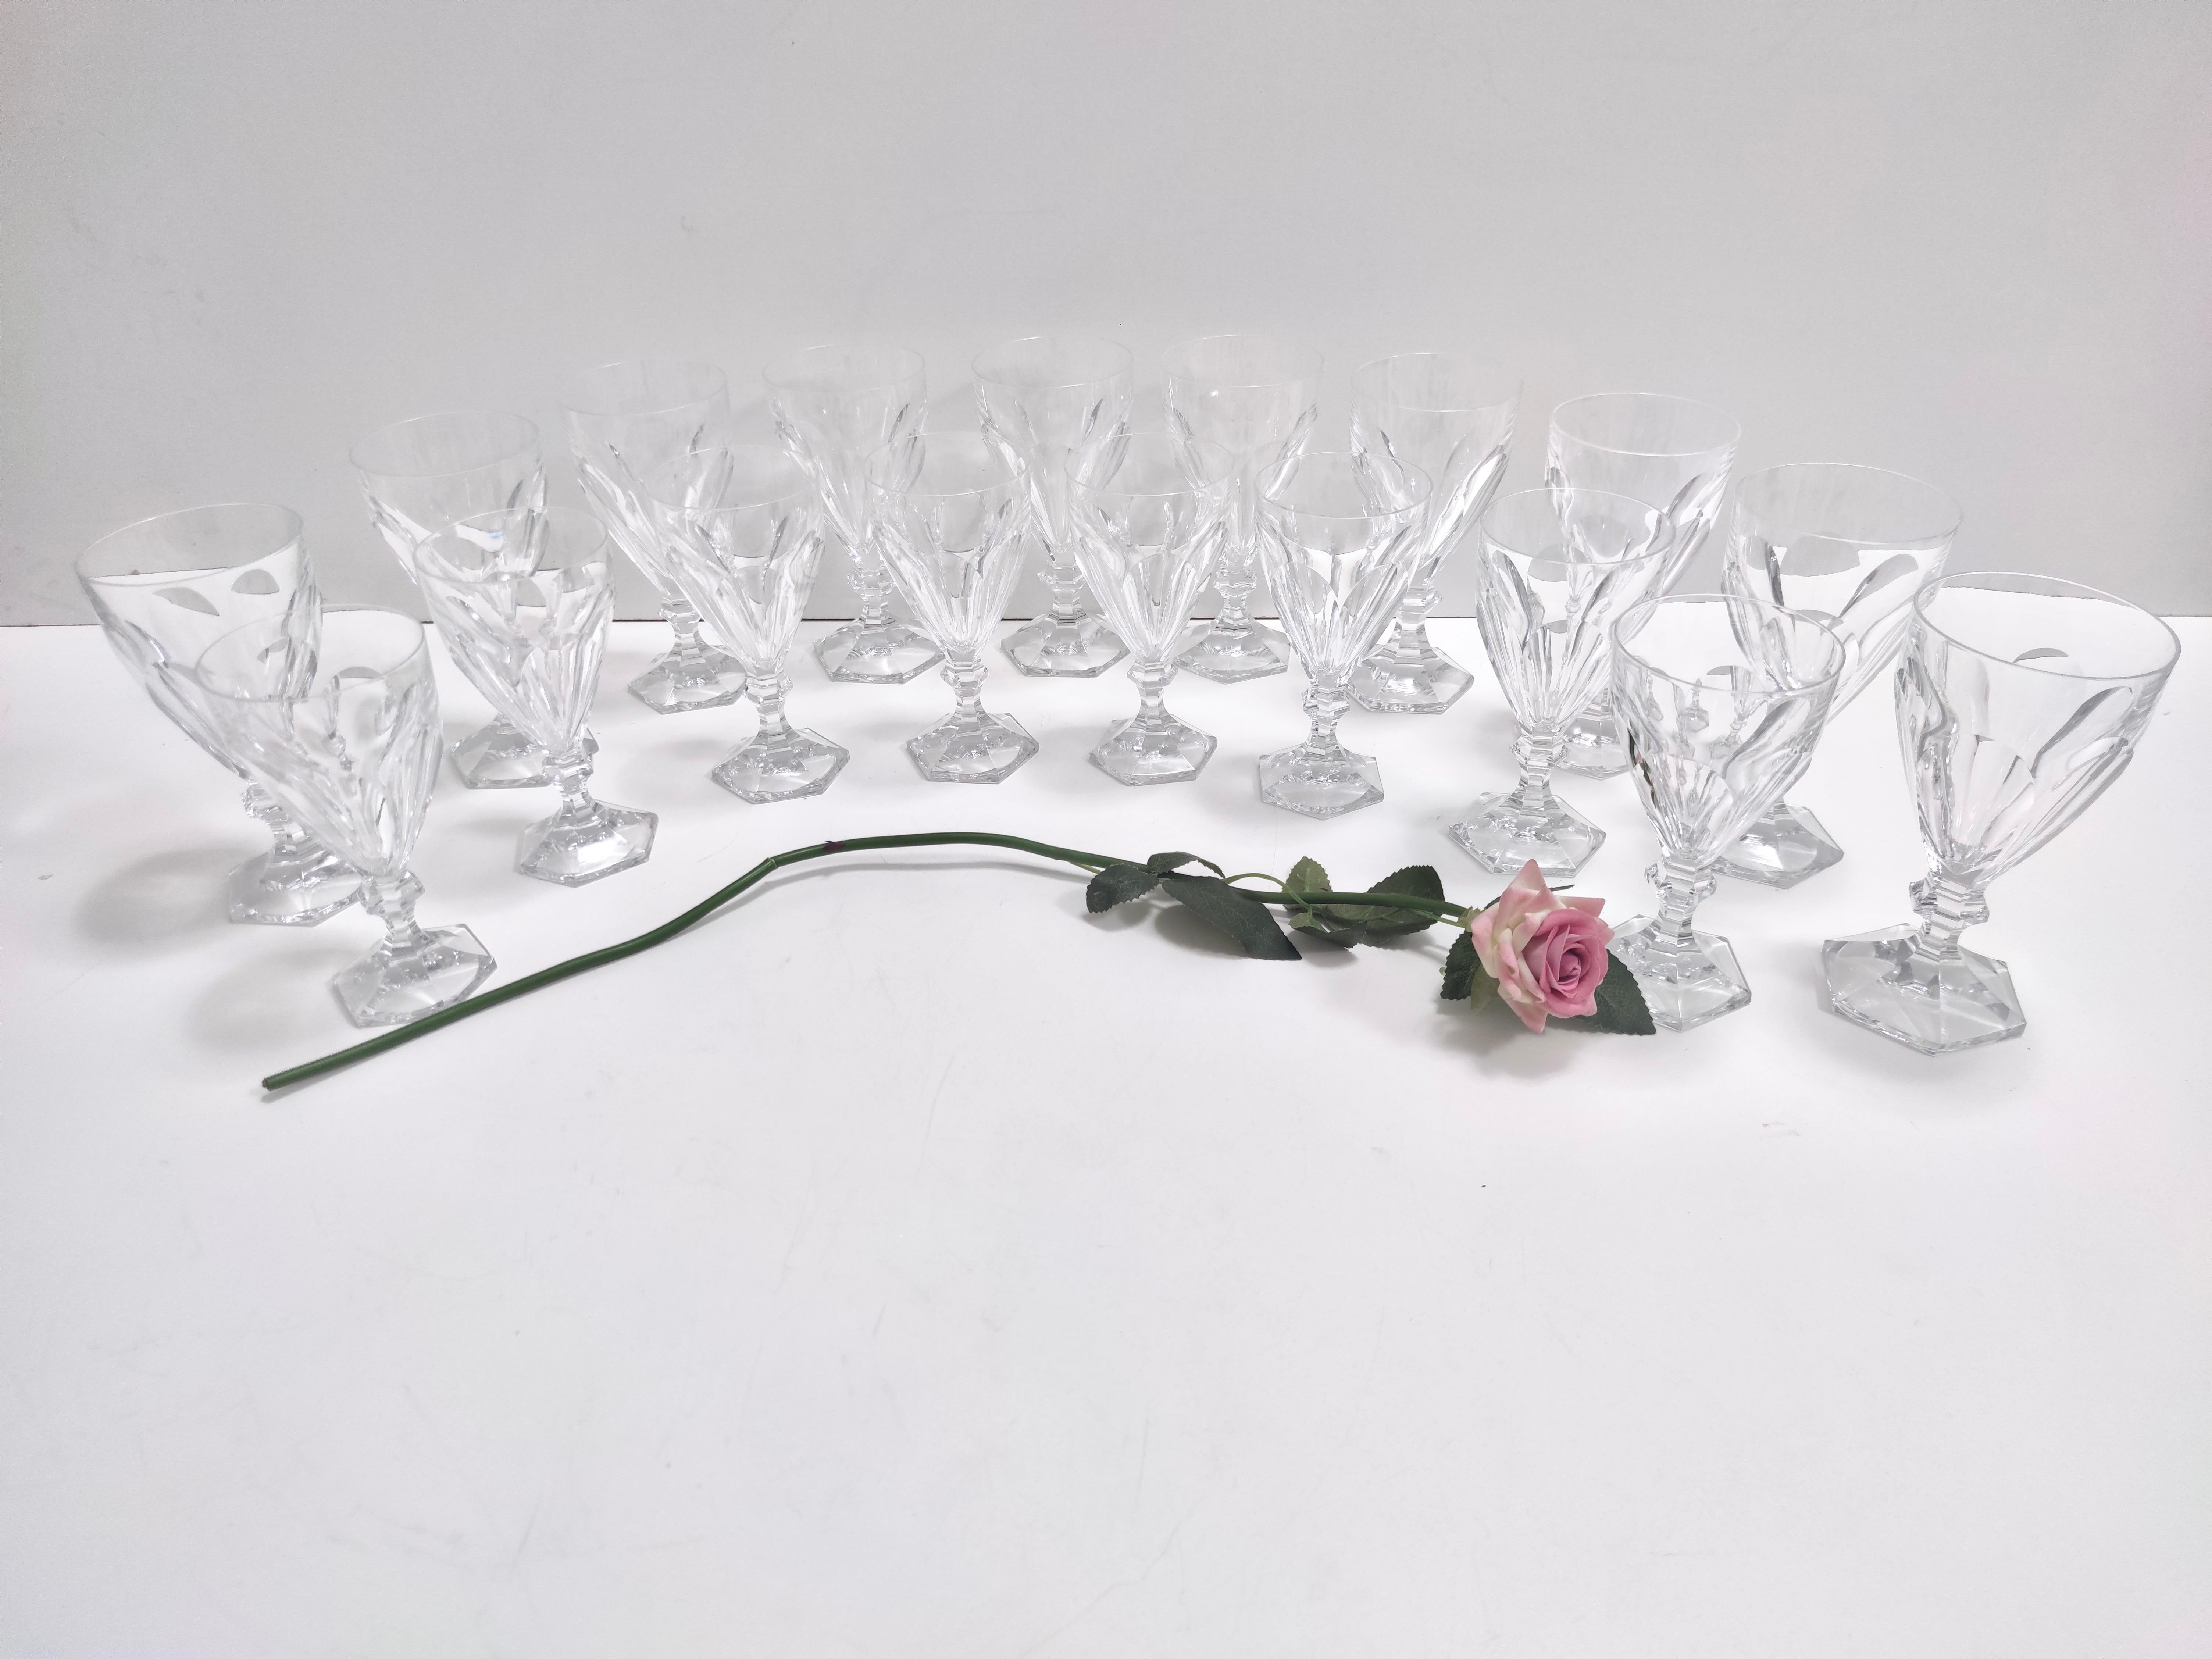 Made in Sweden by Kosta Boda, 1970s. 
These high-quality drinking glasses are made in solid cut crystal, in the style of Baccarat.
Kosta Boda is one of the oldest Swedish glassware company and produces high-quality pieces since 1742. 
It is a